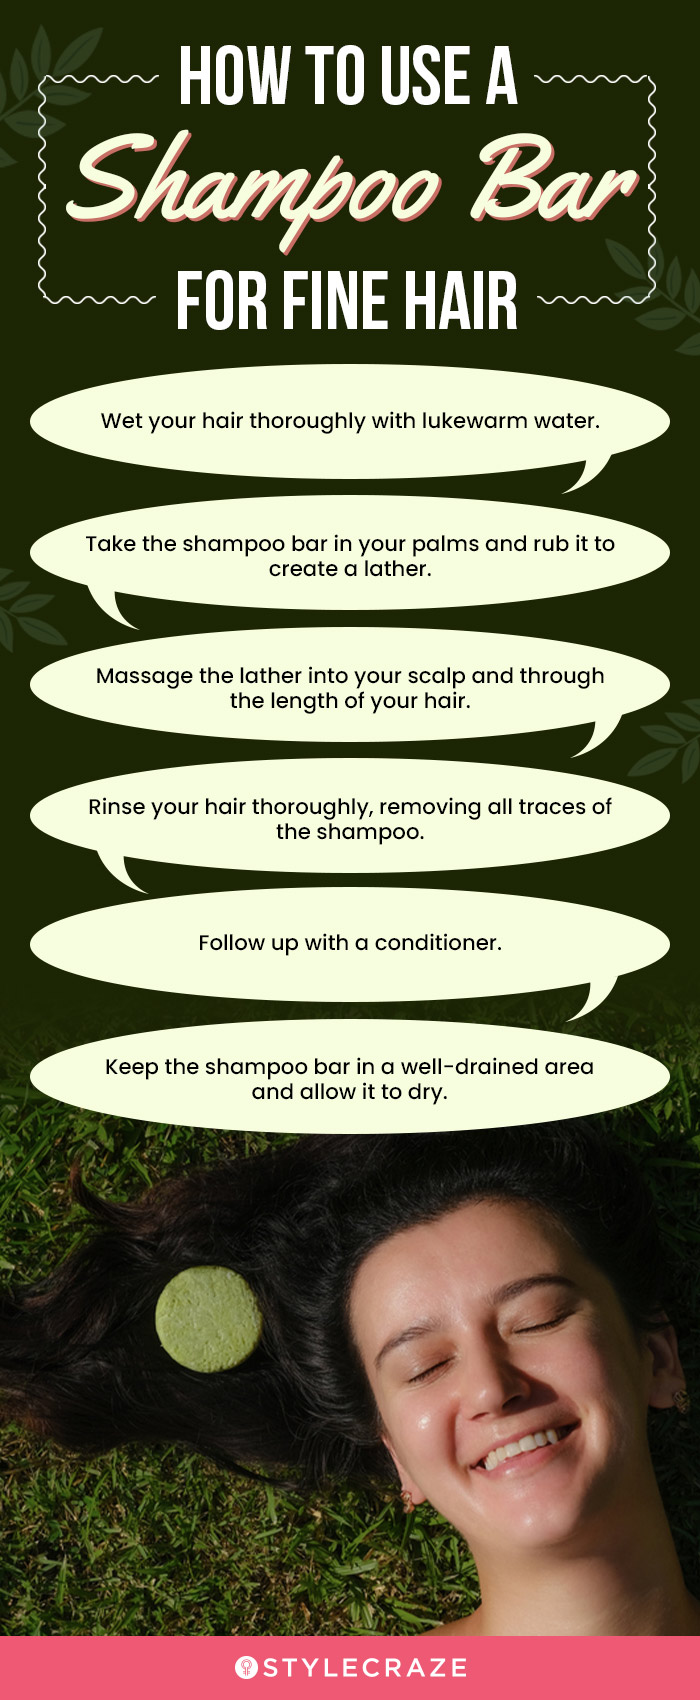 How To Use A Shampoo Bar For Fine Hair (infographic)